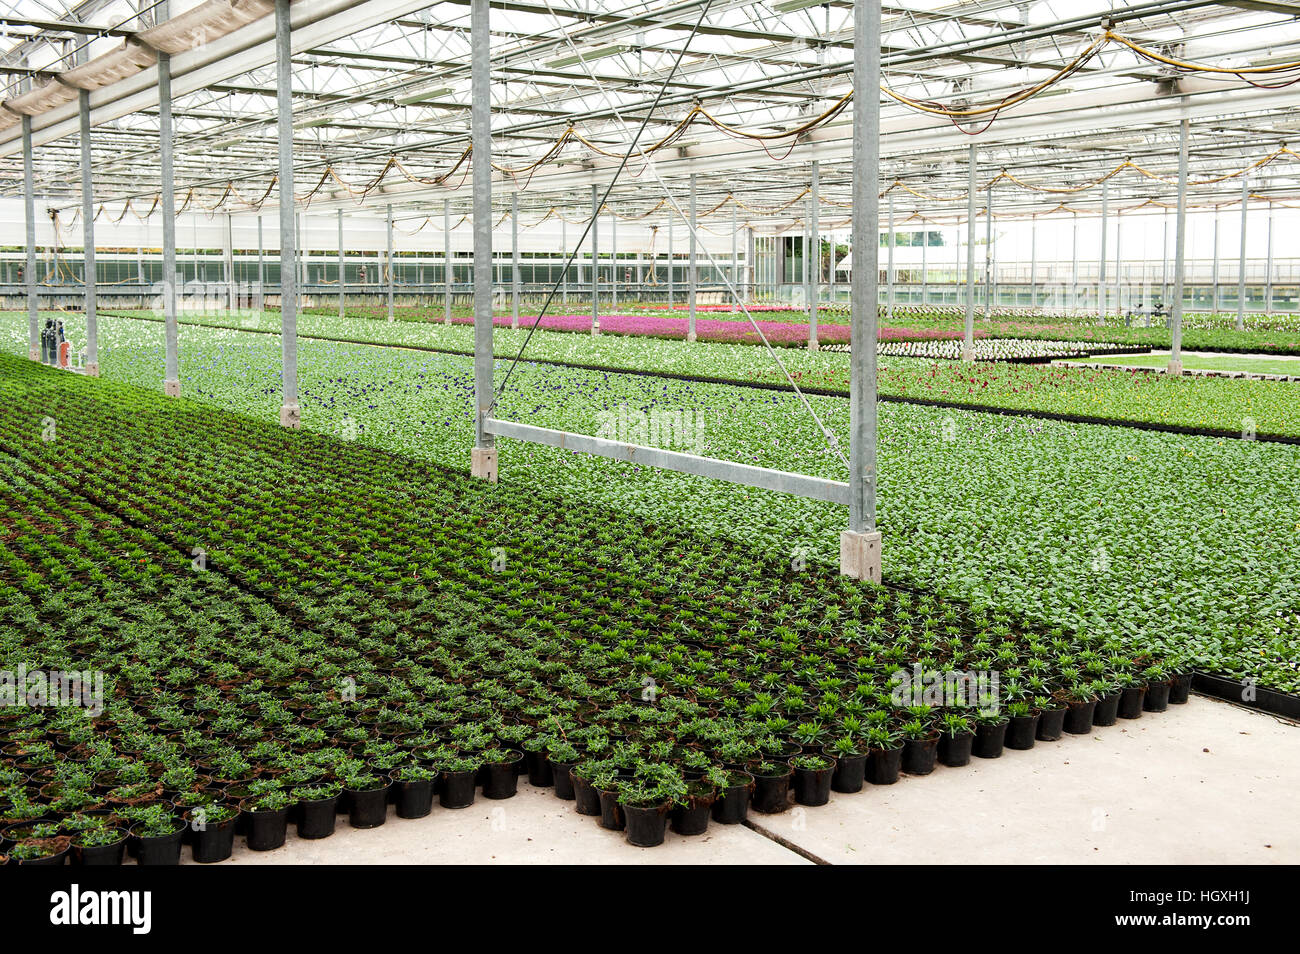 Indoor flower cultivation method - green floor of planting stock greenhouse covered with flower pots Stock Photo